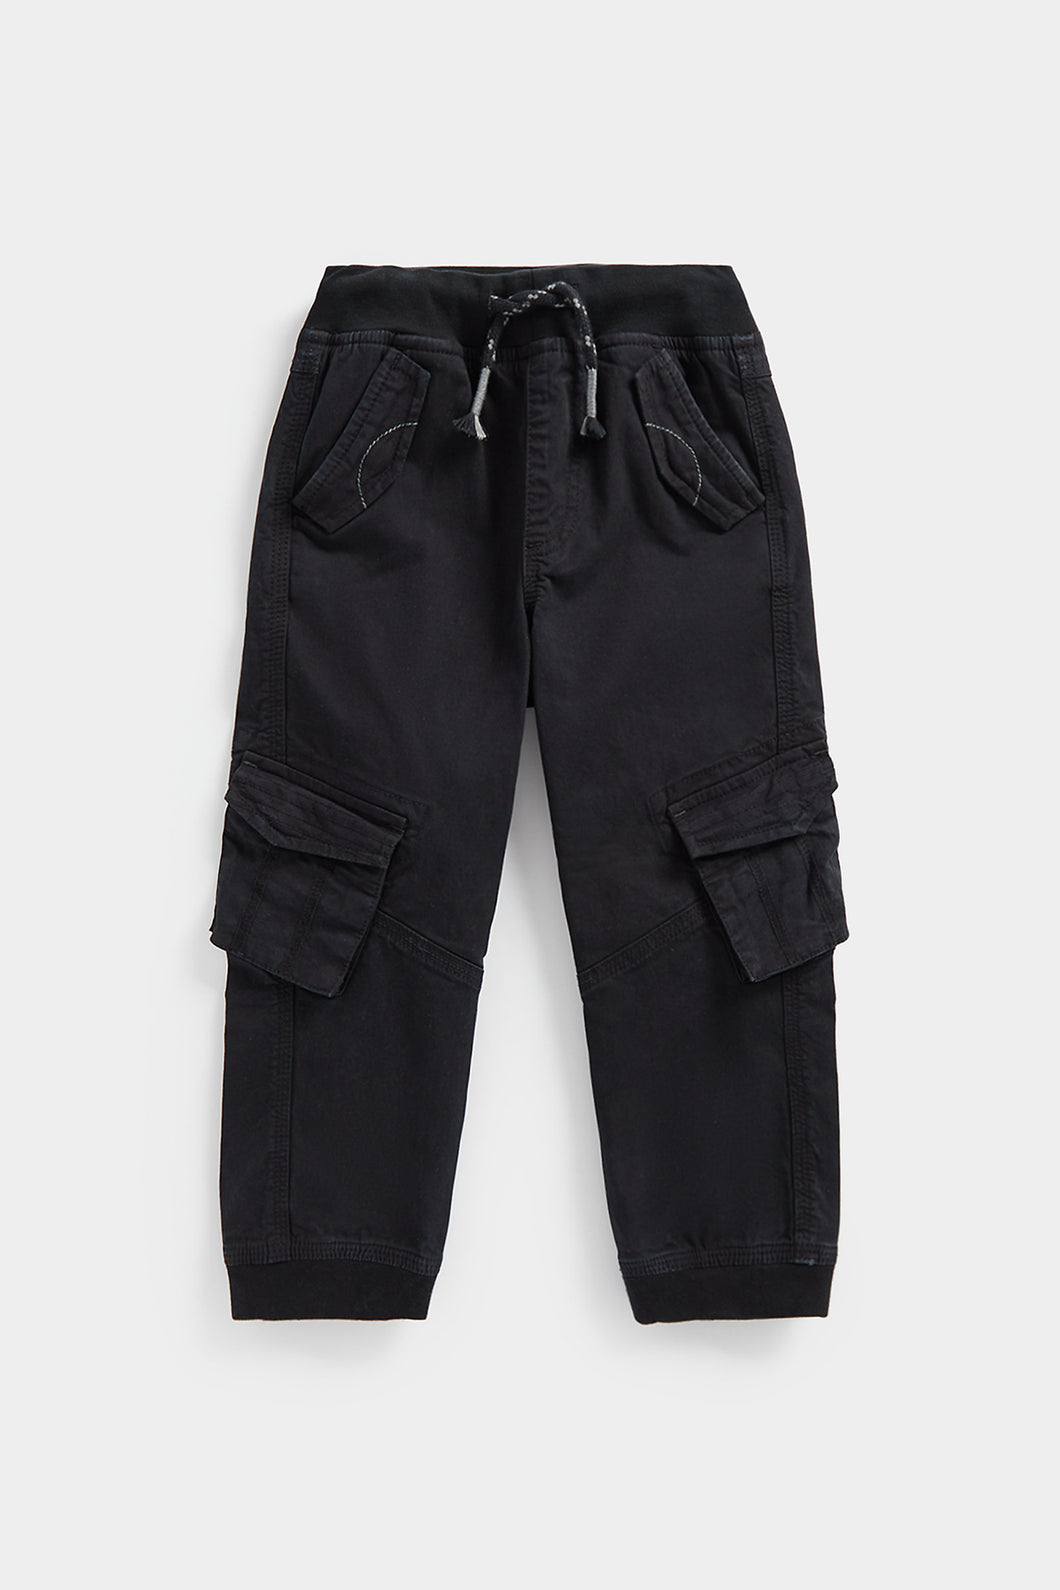 Mothercare Black Cargo Trousers